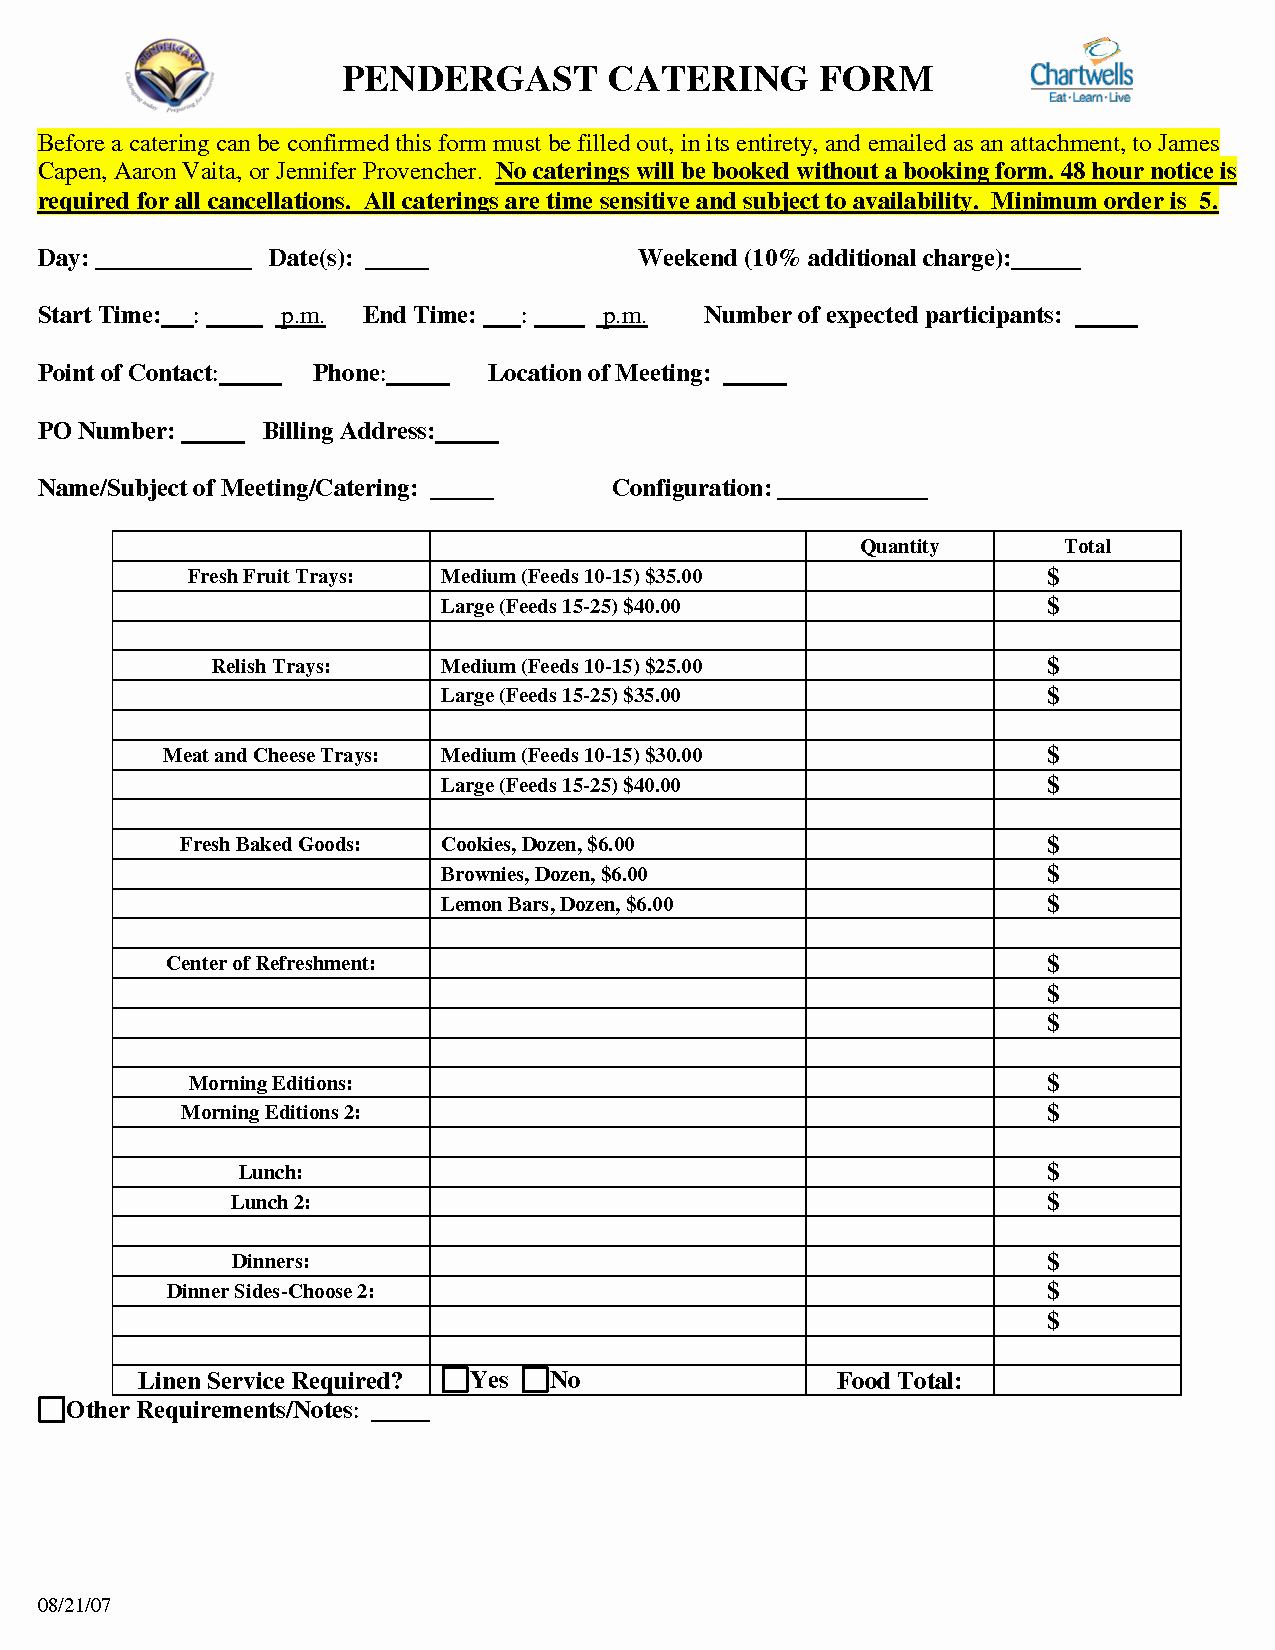 Catering order form Template New Catering order forms Template 11 Catering Invoice